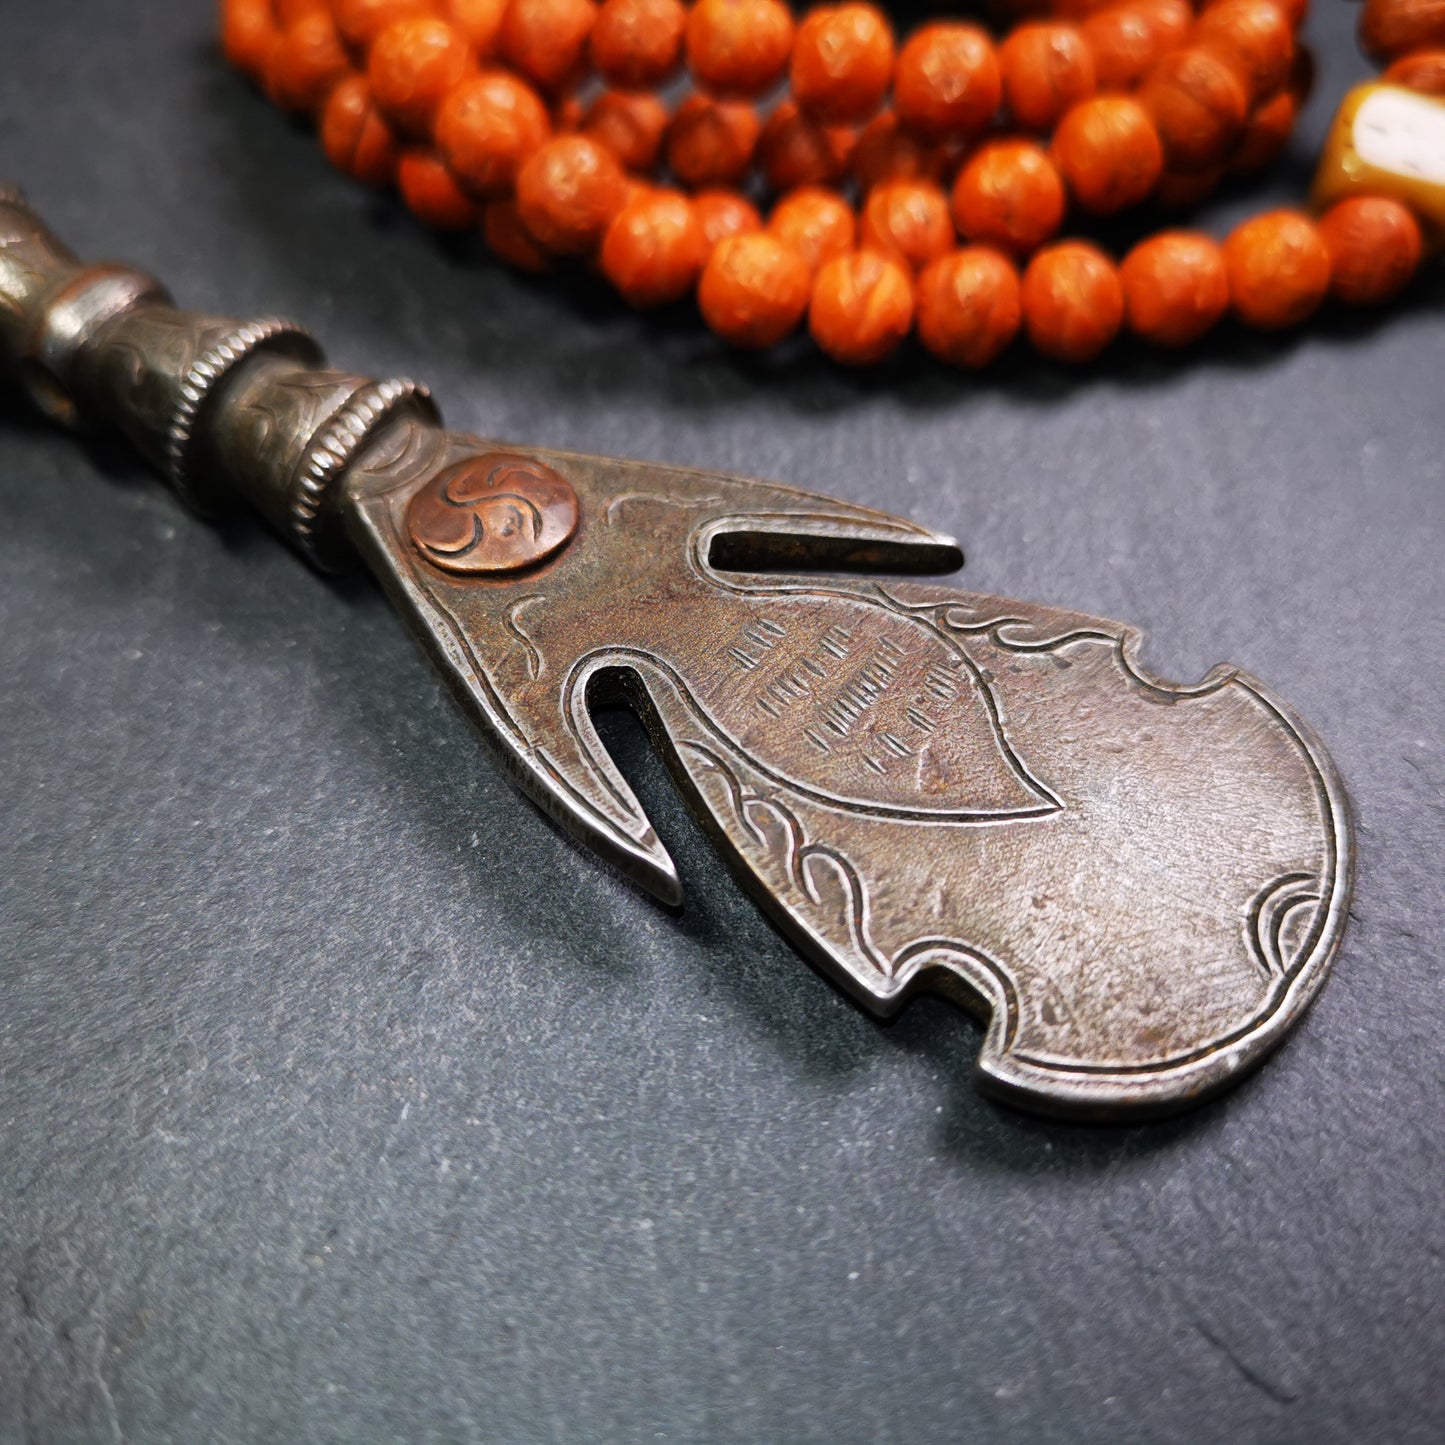 This old kartika is handmade by Tibetan craftsmen in 2000s. Its upper part is a half vajra, and the lower part is a kartika, made of cold iron,copper wire inlaid, carved cloud pattern